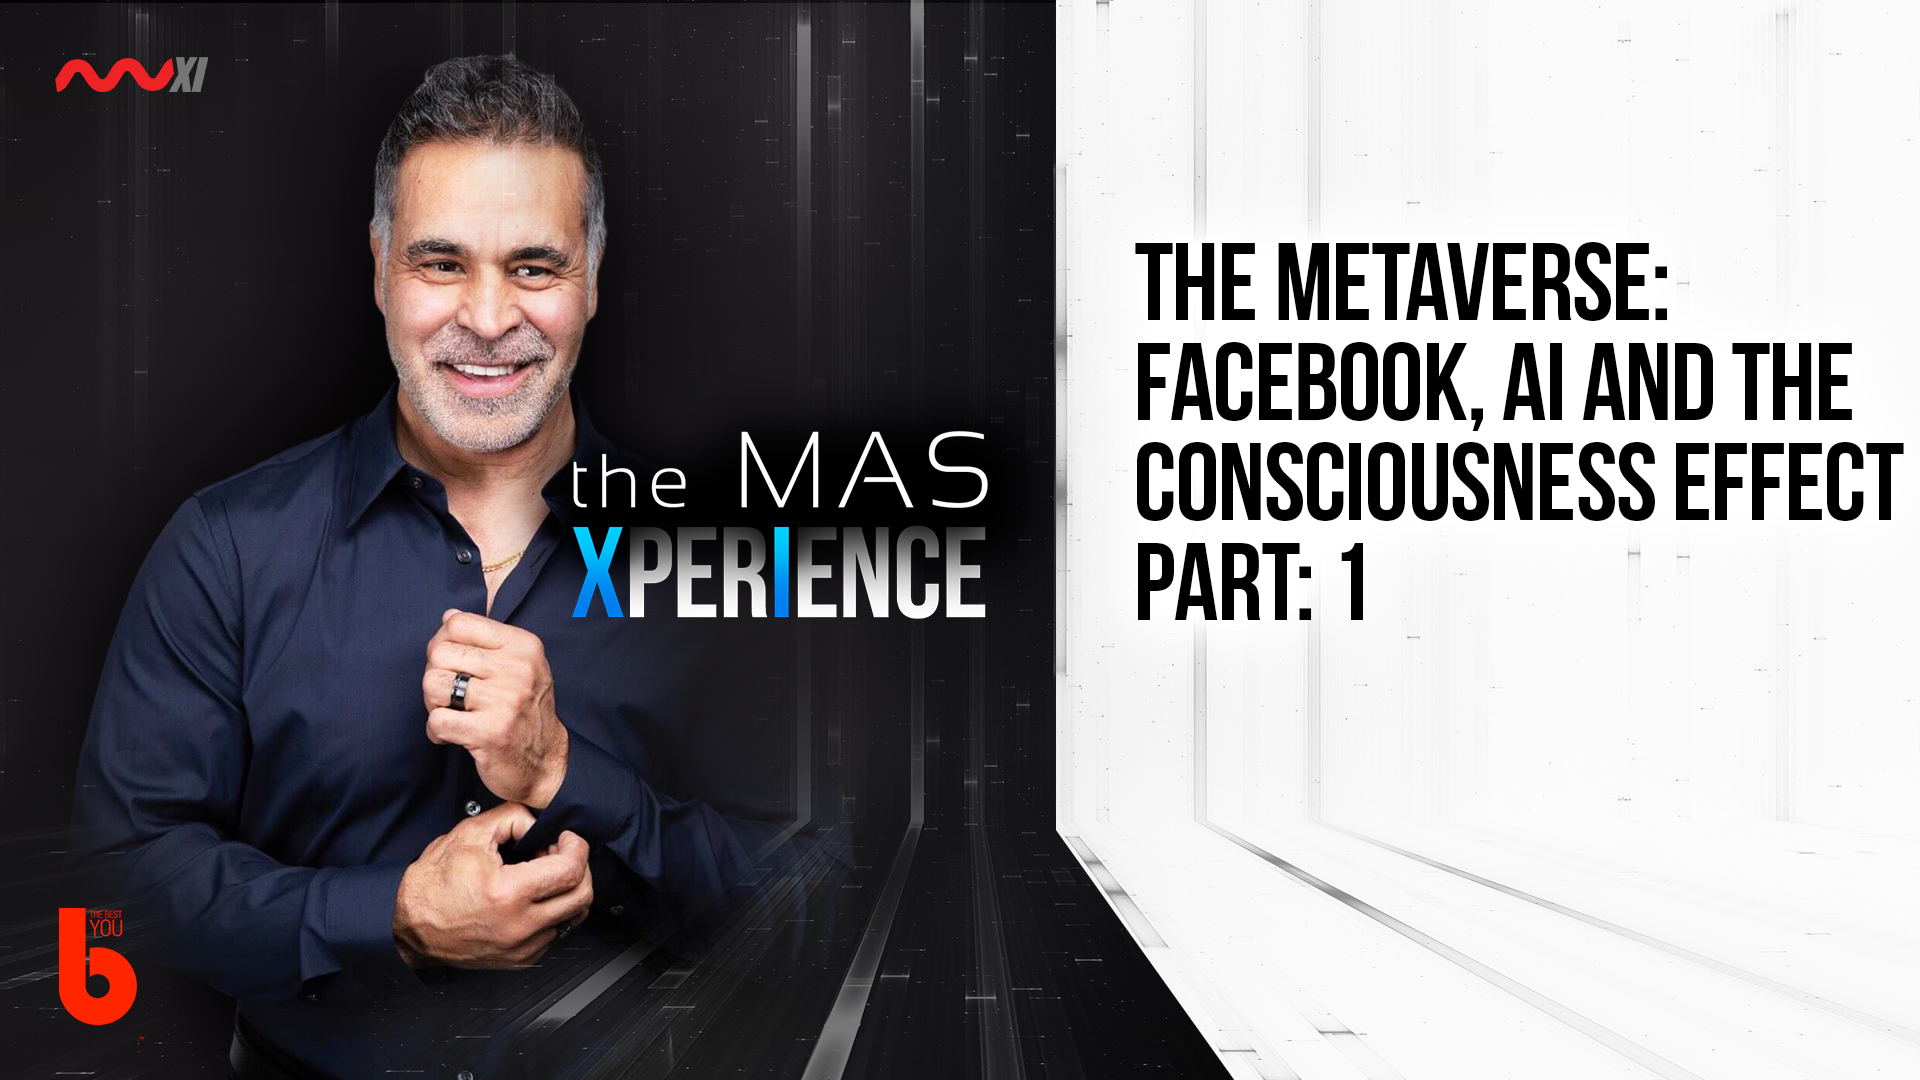 The Metaverse: Facebook, AI and the Consciousness Effect, Part 1